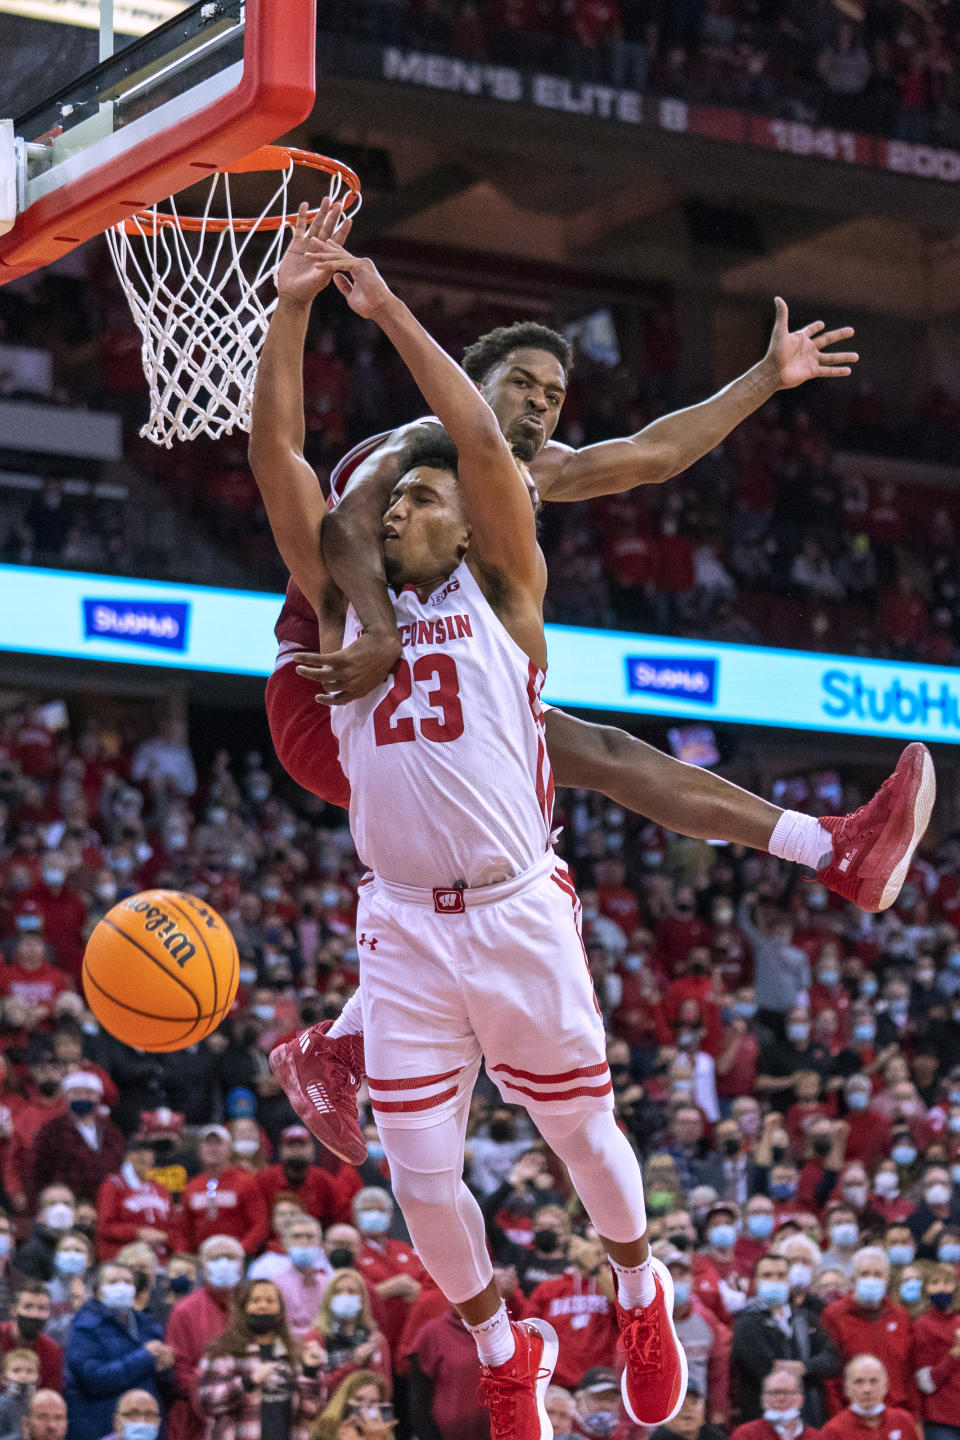 Indiana's Xavier Johnson, top, fouls Wisconsin's Chucky Hepburn (23) during the second half of an NCAA college basketball game Wednesday, Dec. 8, 2021, in Madison, Wis. Wisconsin won 64-59. (AP Photo/Andy Manis)